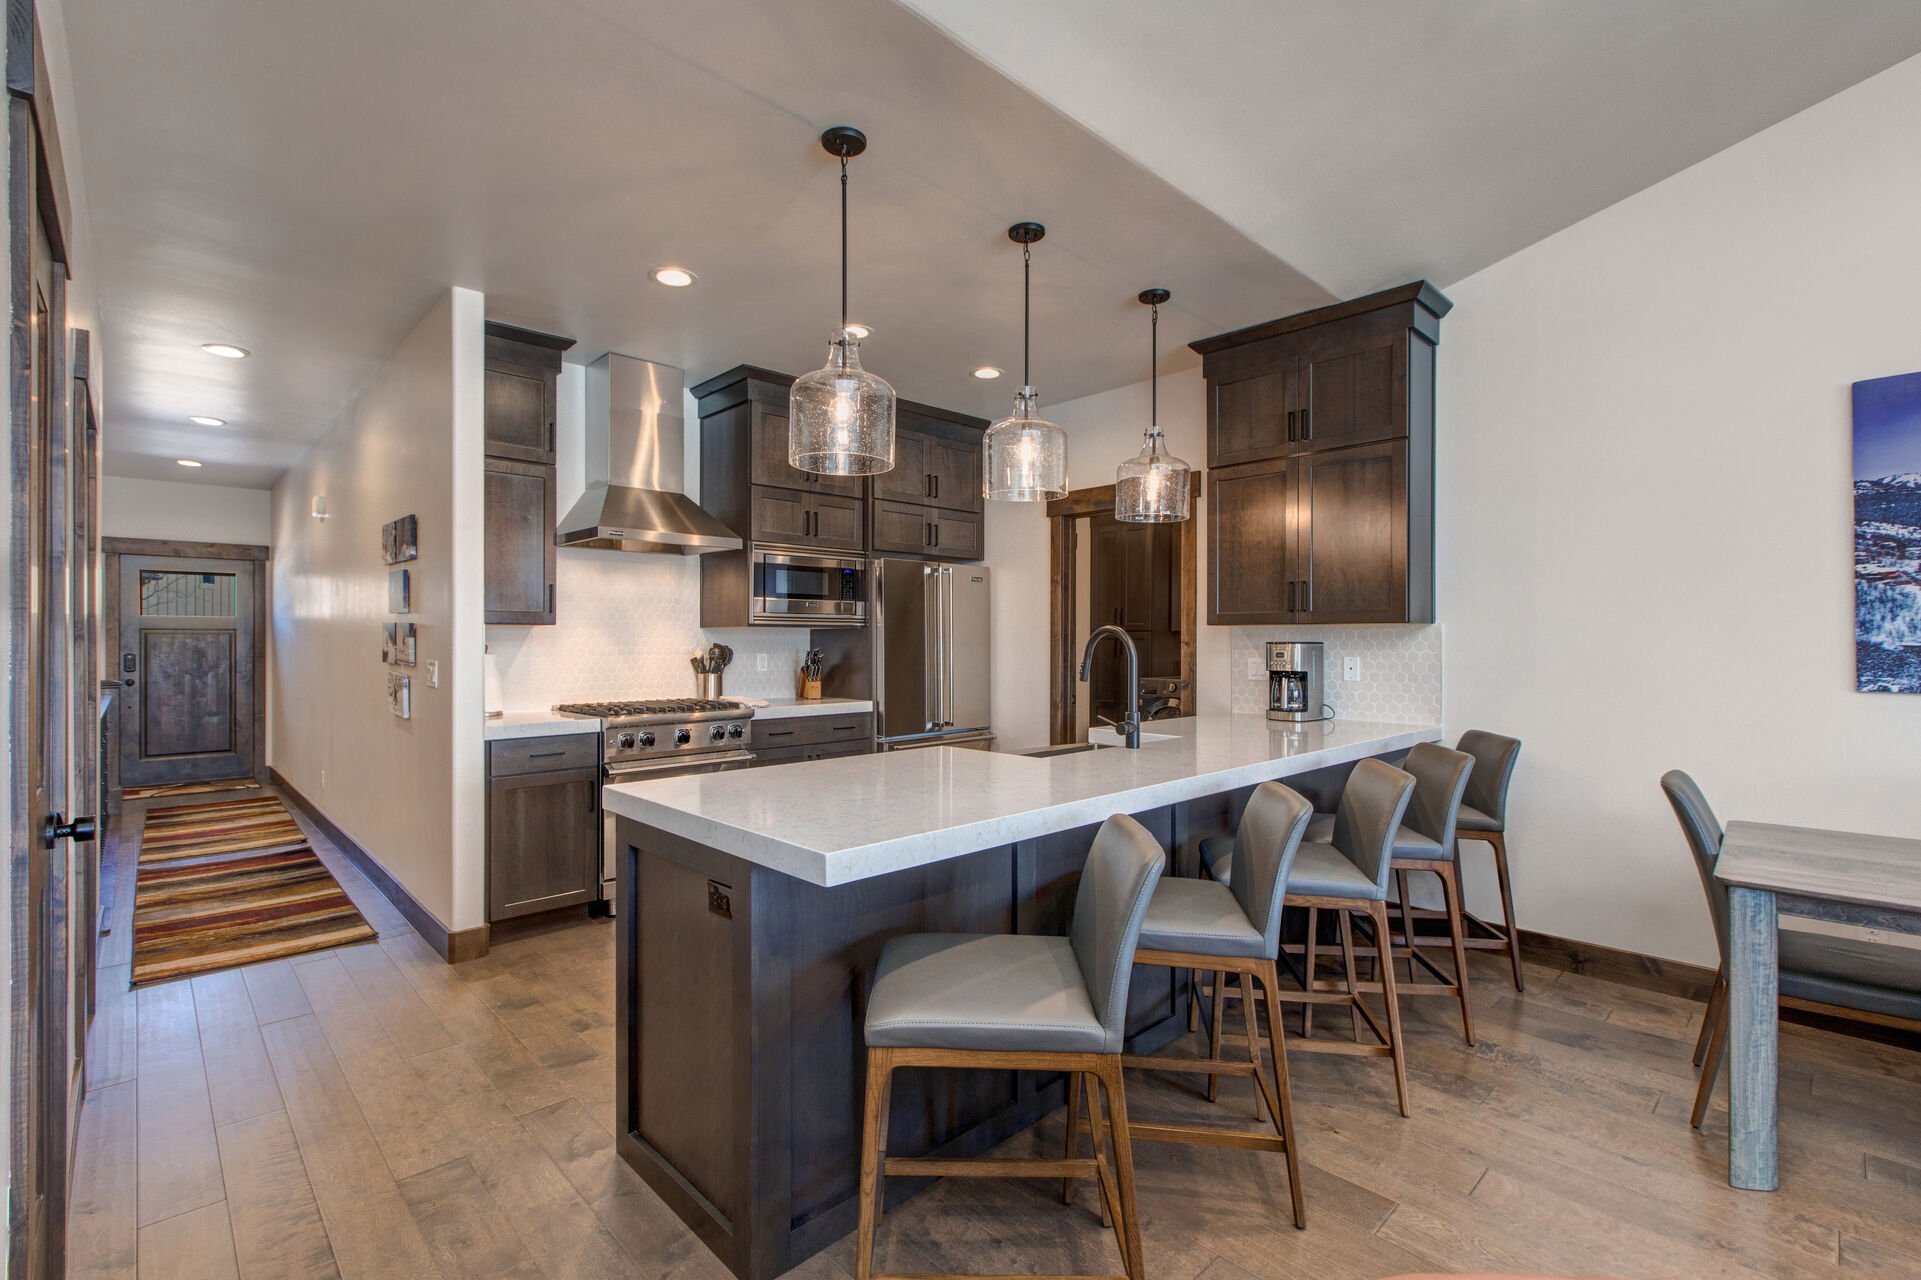 Fully Equipped Kitchen with sleek stone countertops, stainless steel Viking appliances, ample counter-space, and bar seating for five